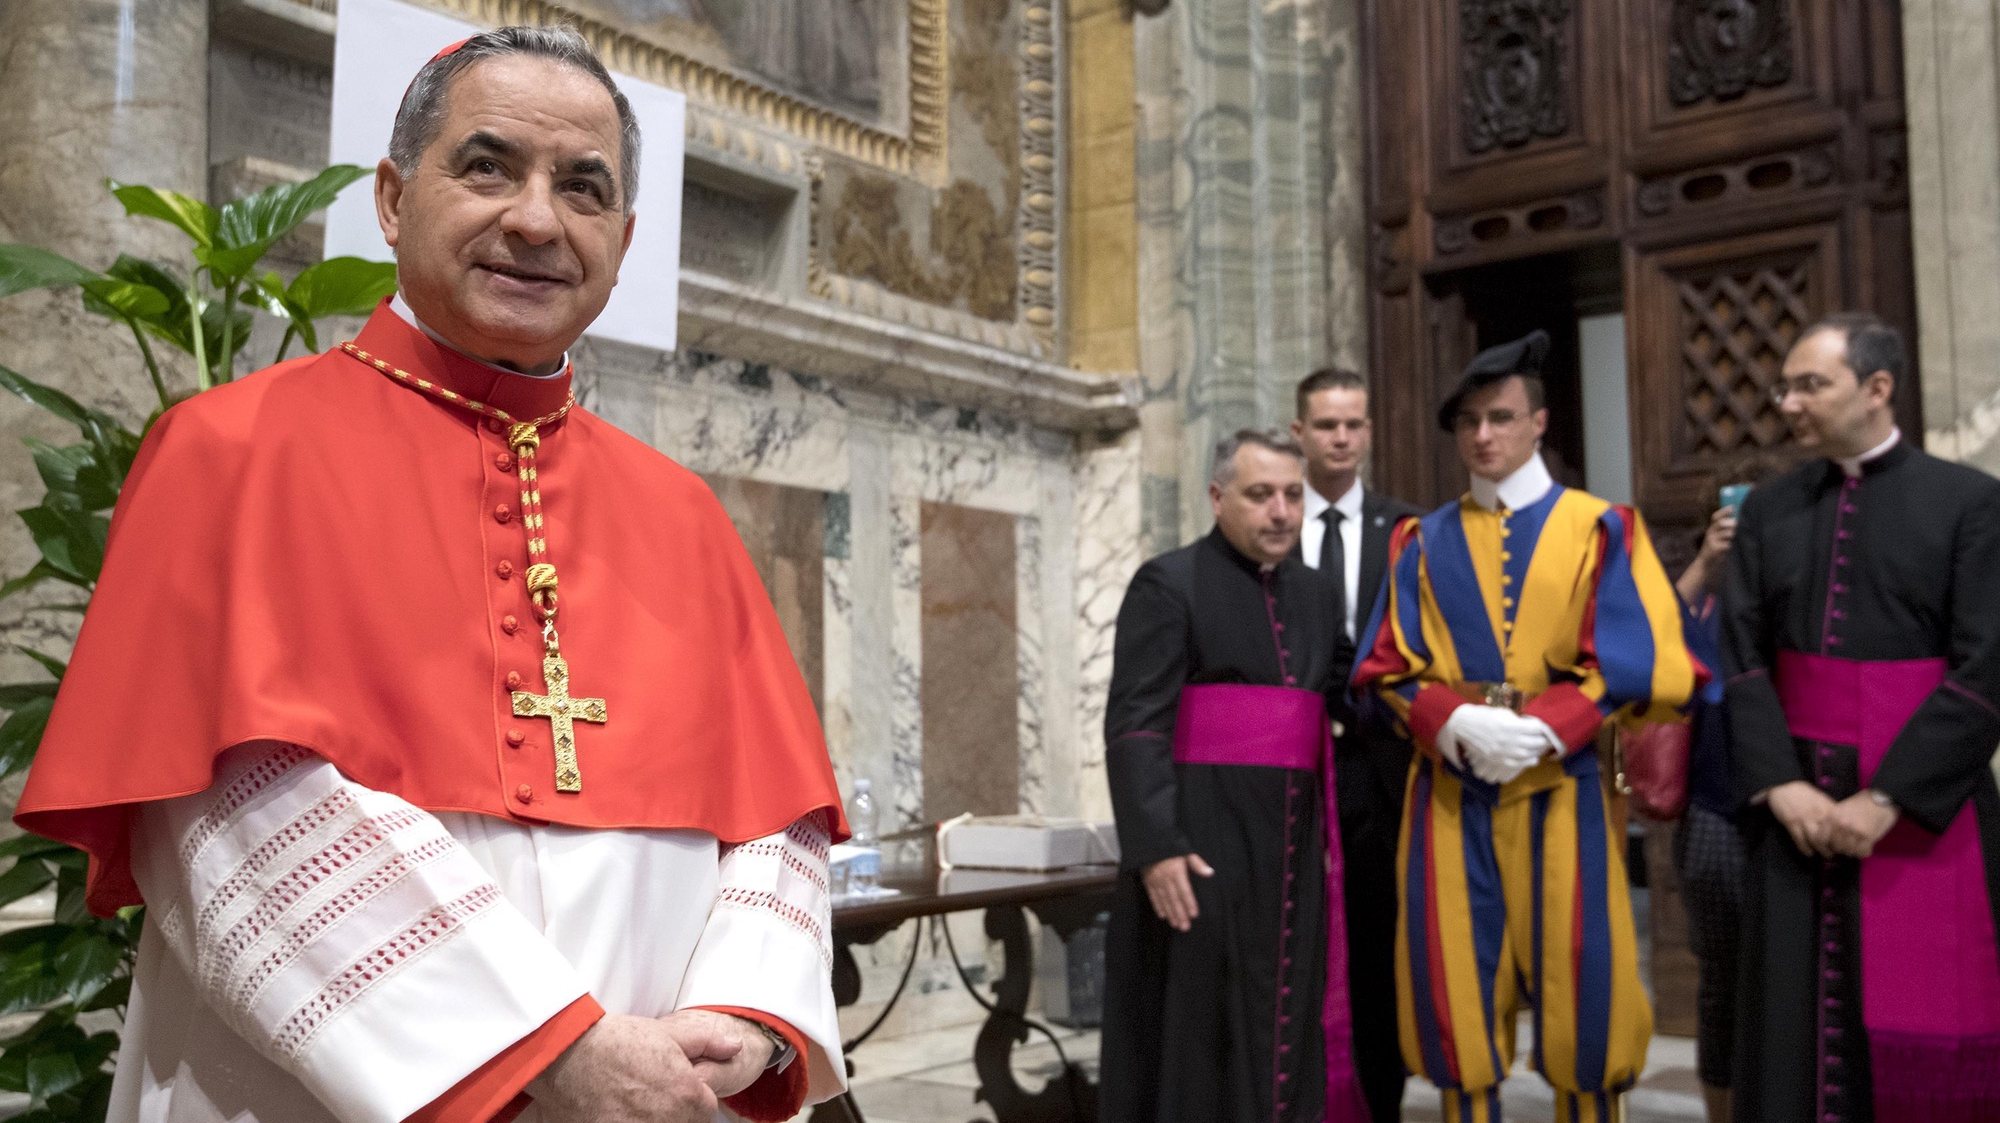 epa06848346 Substitute of the Vatican Secretary of State and Special Delegate for the Sovereign Military Order of Malta from Italy, Giovanni Angelo Becciu (L) poses for photographers after the Pope Francis&#039; Ordinary Public Consistory mass to create 14 new cardinals from 11 countries in Saint Peters Basilica at the Vatican, 28 June 2018. The cardinals-designate are from Bolivia, Iraq, Italy, Japan, Pakistan, Poland, Portugal, Peru, Madagascar, Mexico and Spain.  EPA/CLAUDIO PERI